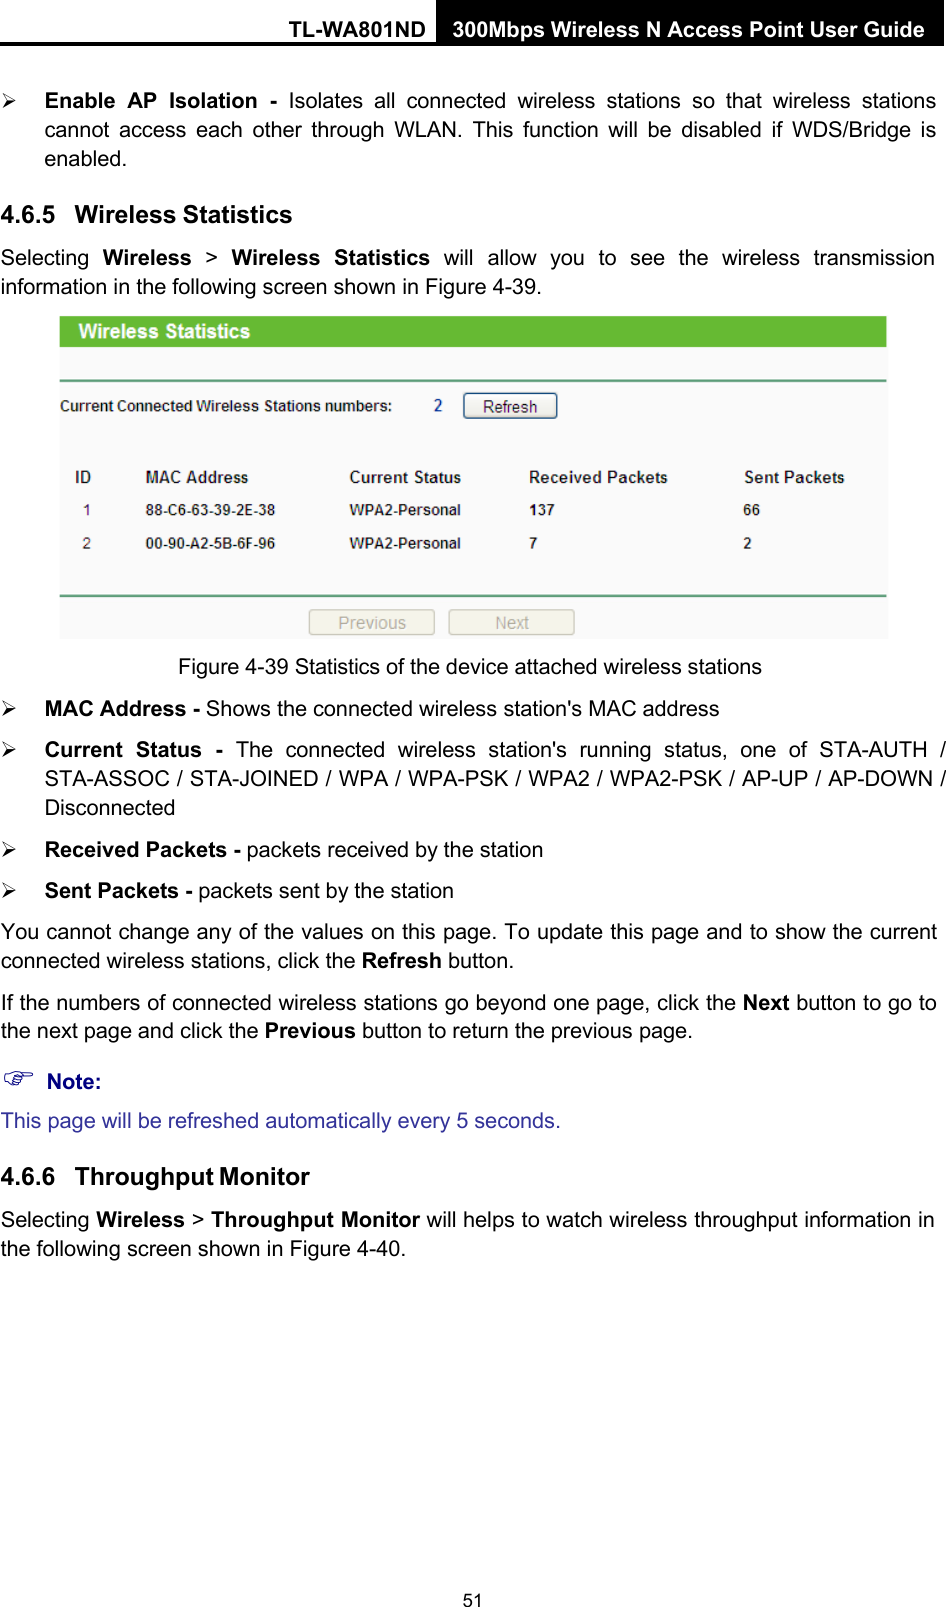 TL-WA801ND 300Mbps Wireless N Access Point User Guide 51     Enable AP Isolation  -  Isolates all connected wireless stations so that wireless stations cannot access each other through WLAN. This function will be disabled if WDS/Bridge is enabled.  4.6.5 Wireless Statistics Selecting  Wireless  &gt;  Wireless  Statistics  will  allow  you  to  see  the  wireless  transmission information in the following screen shown in Figure 4-39.   Figure 4-39 Statistics of the device attached wireless stations  MAC Address - Shows the connected wireless station&apos;s MAC address  Current Status  -  The connected wireless station&apos;s running status, one of STA-AUTH  / STA-ASSOC / STA-JOINED / WPA / WPA-PSK / WPA2 / WPA2-PSK / AP-UP / AP-DOWN / Disconnected  Received Packets - packets received by the station  Sent Packets - packets sent by the station You cannot change any of the values on this page. To update this page and to show the current connected wireless stations, click the Refresh button. If the numbers of connected wireless stations go beyond one page, click the Next button to go to the next page and click the Previous button to return the previous page.  Note: This page will be refreshed automatically every 5 seconds.  4.6.6 Throughput Monitor Selecting Wireless &gt; Throughput Monitor will helps to watch wireless throughput information in the following screen shown in Figure 4-40. 